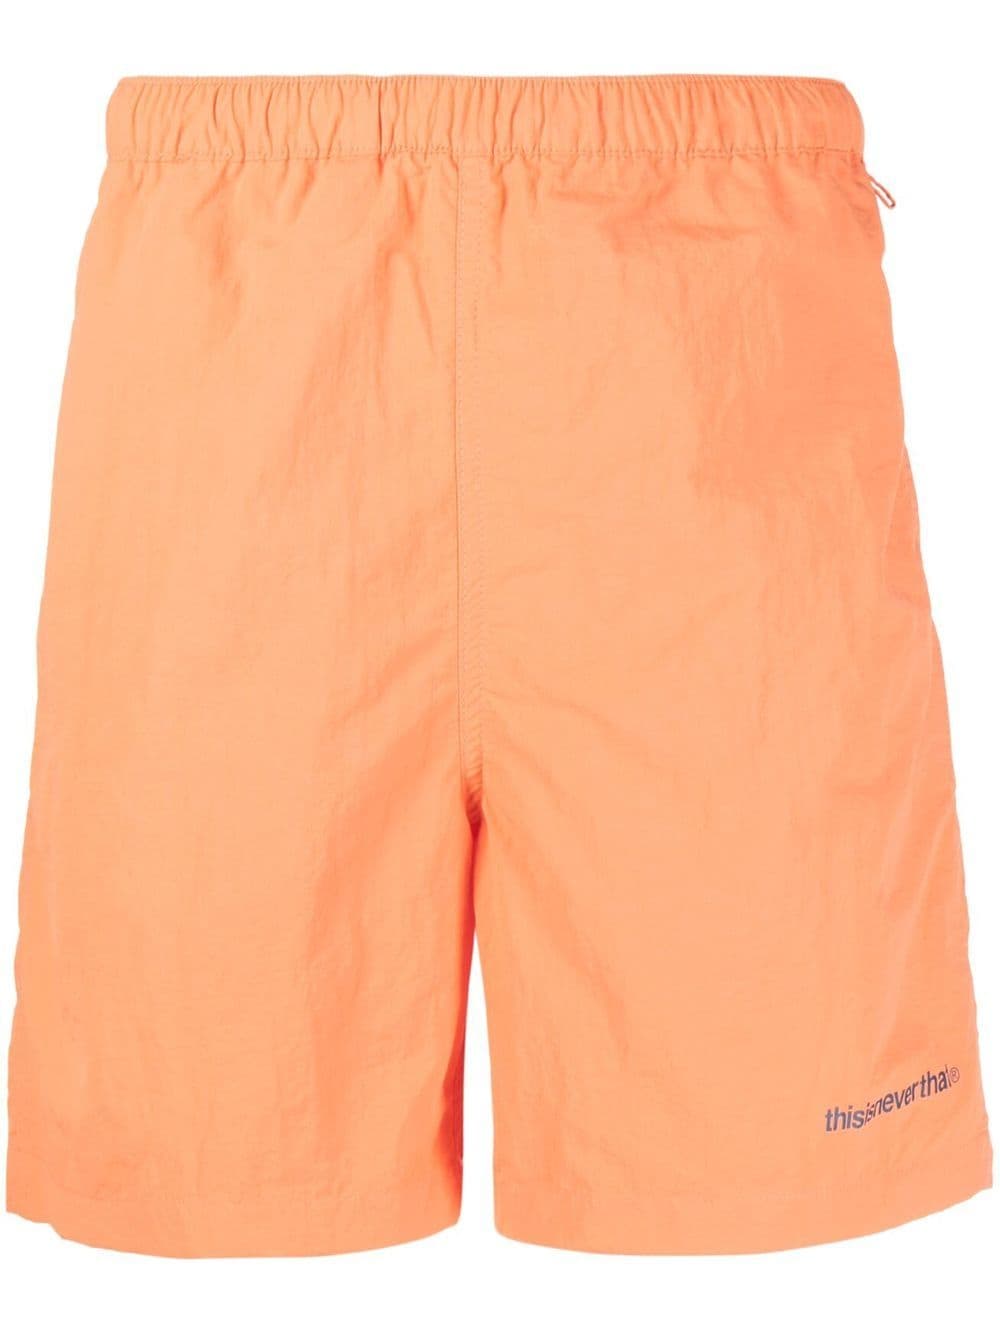 This Is Never That embroidered-logo detail shorts - Orange von This Is Never That